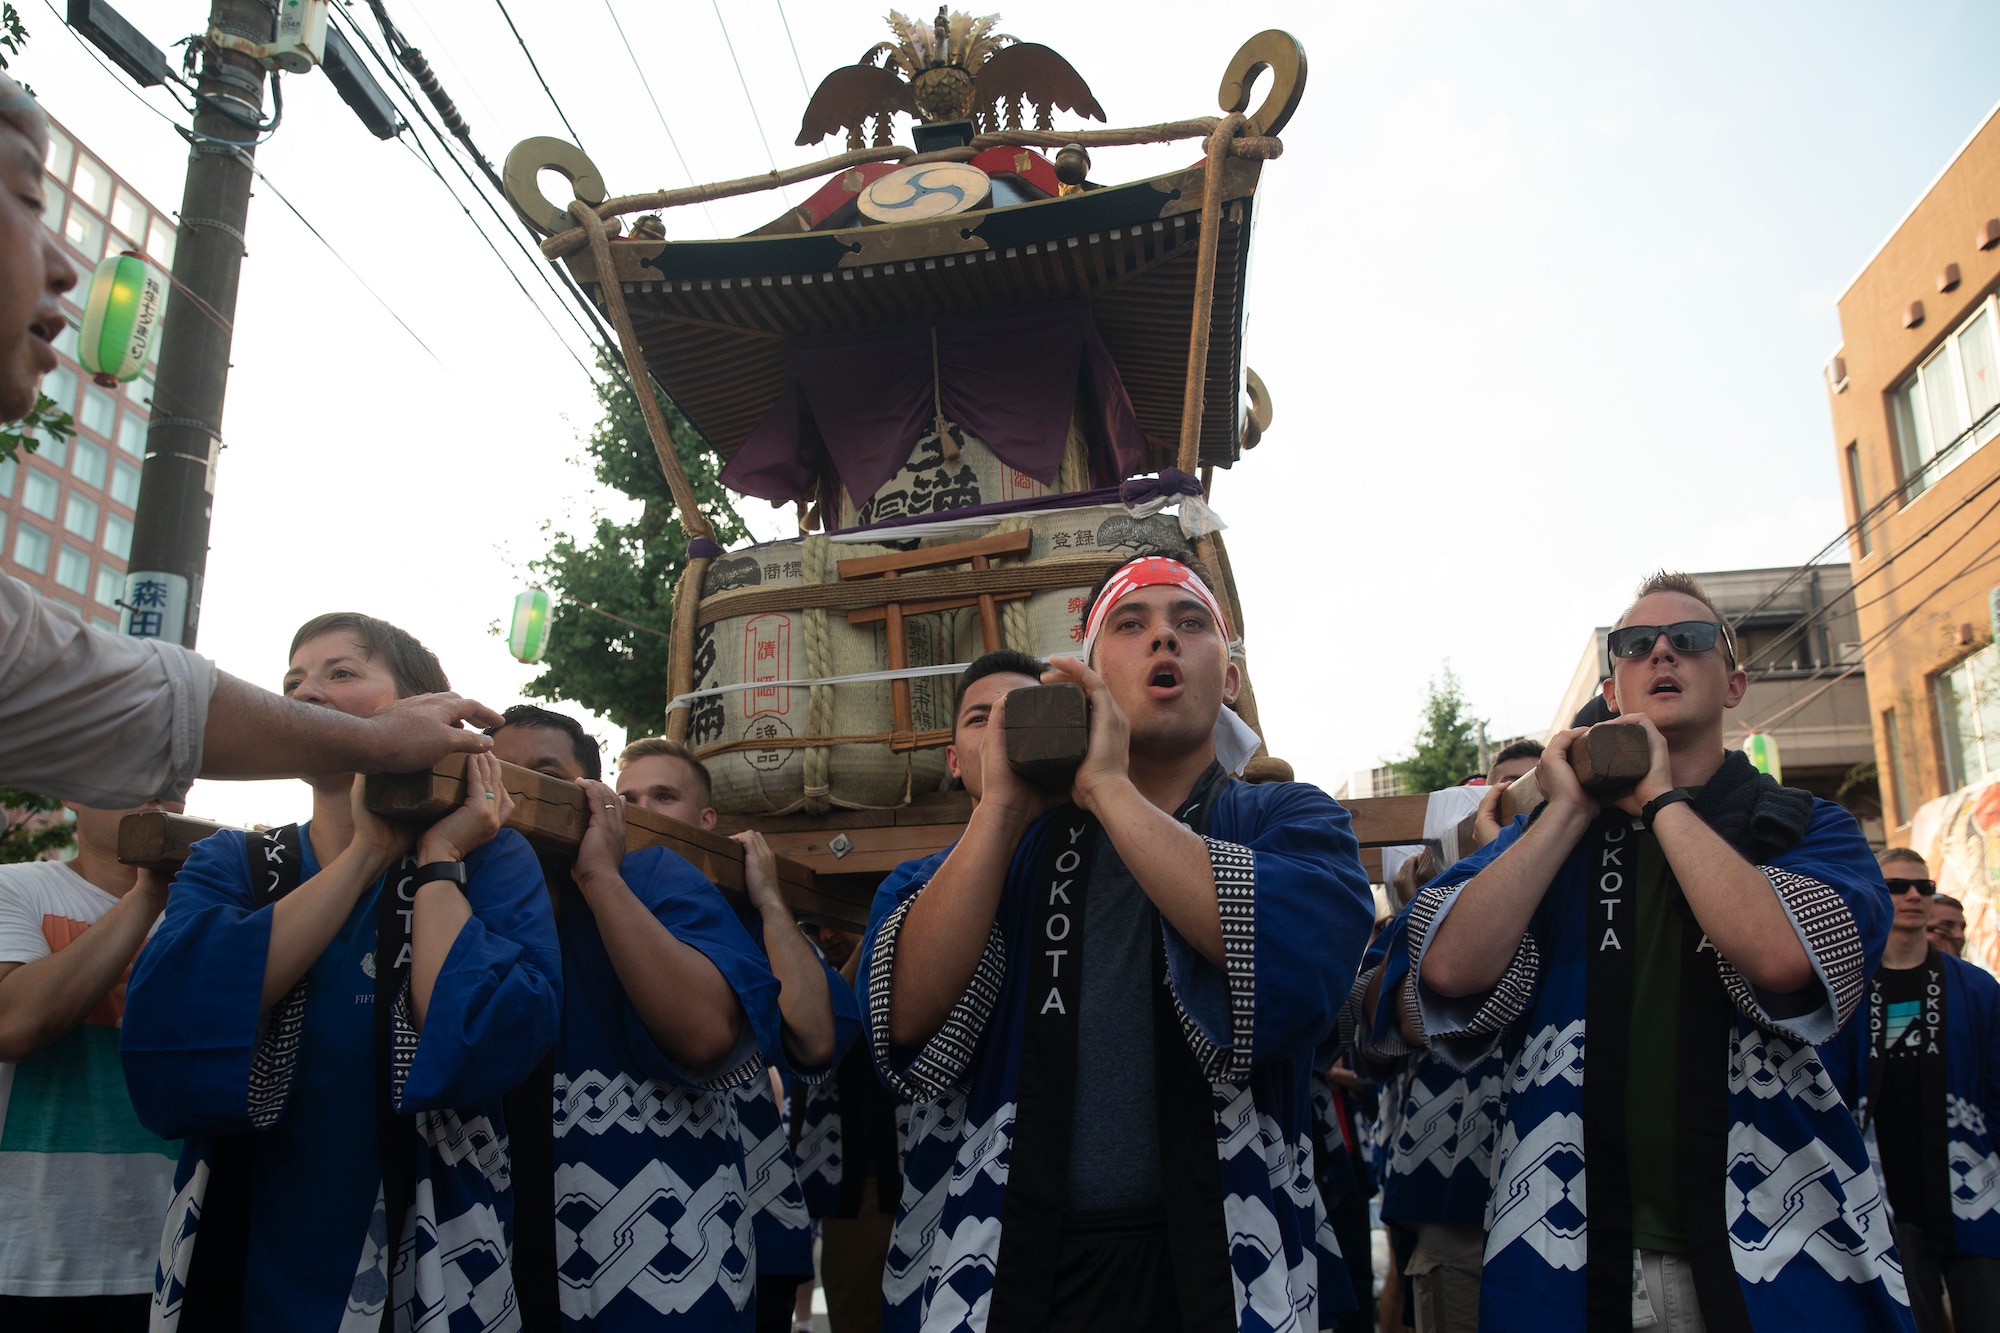 Members from Yokota Air Base carry the 374th Airlift Wing's official mikoshi during the 68th Annual Fussa Tanabata Festival at Fussa City